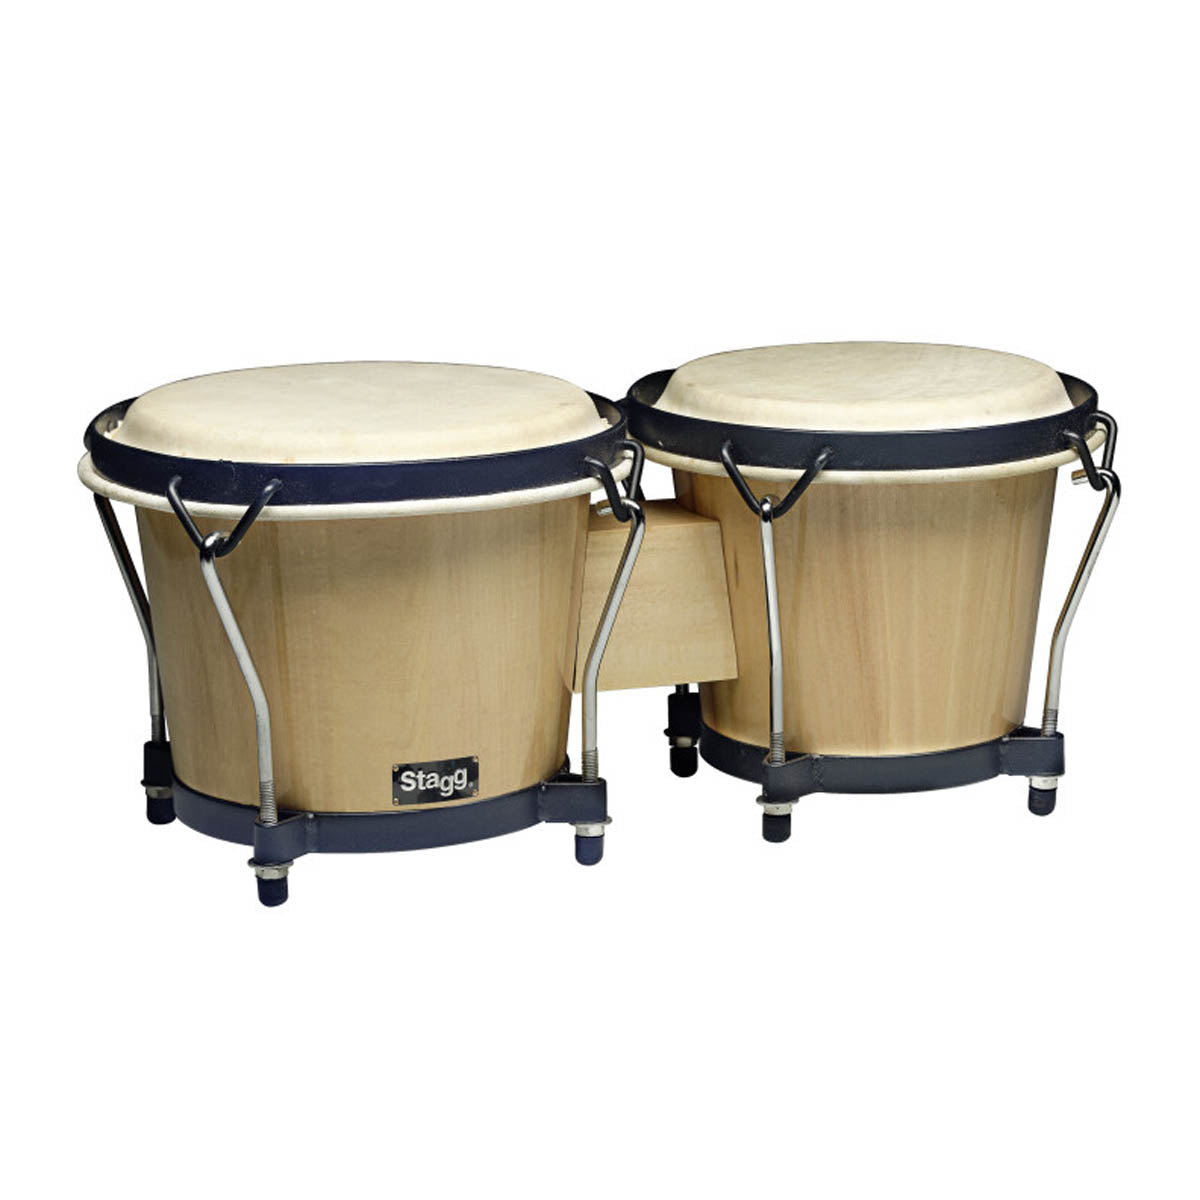 Stagg BW70 Traditional Bongos in Natural